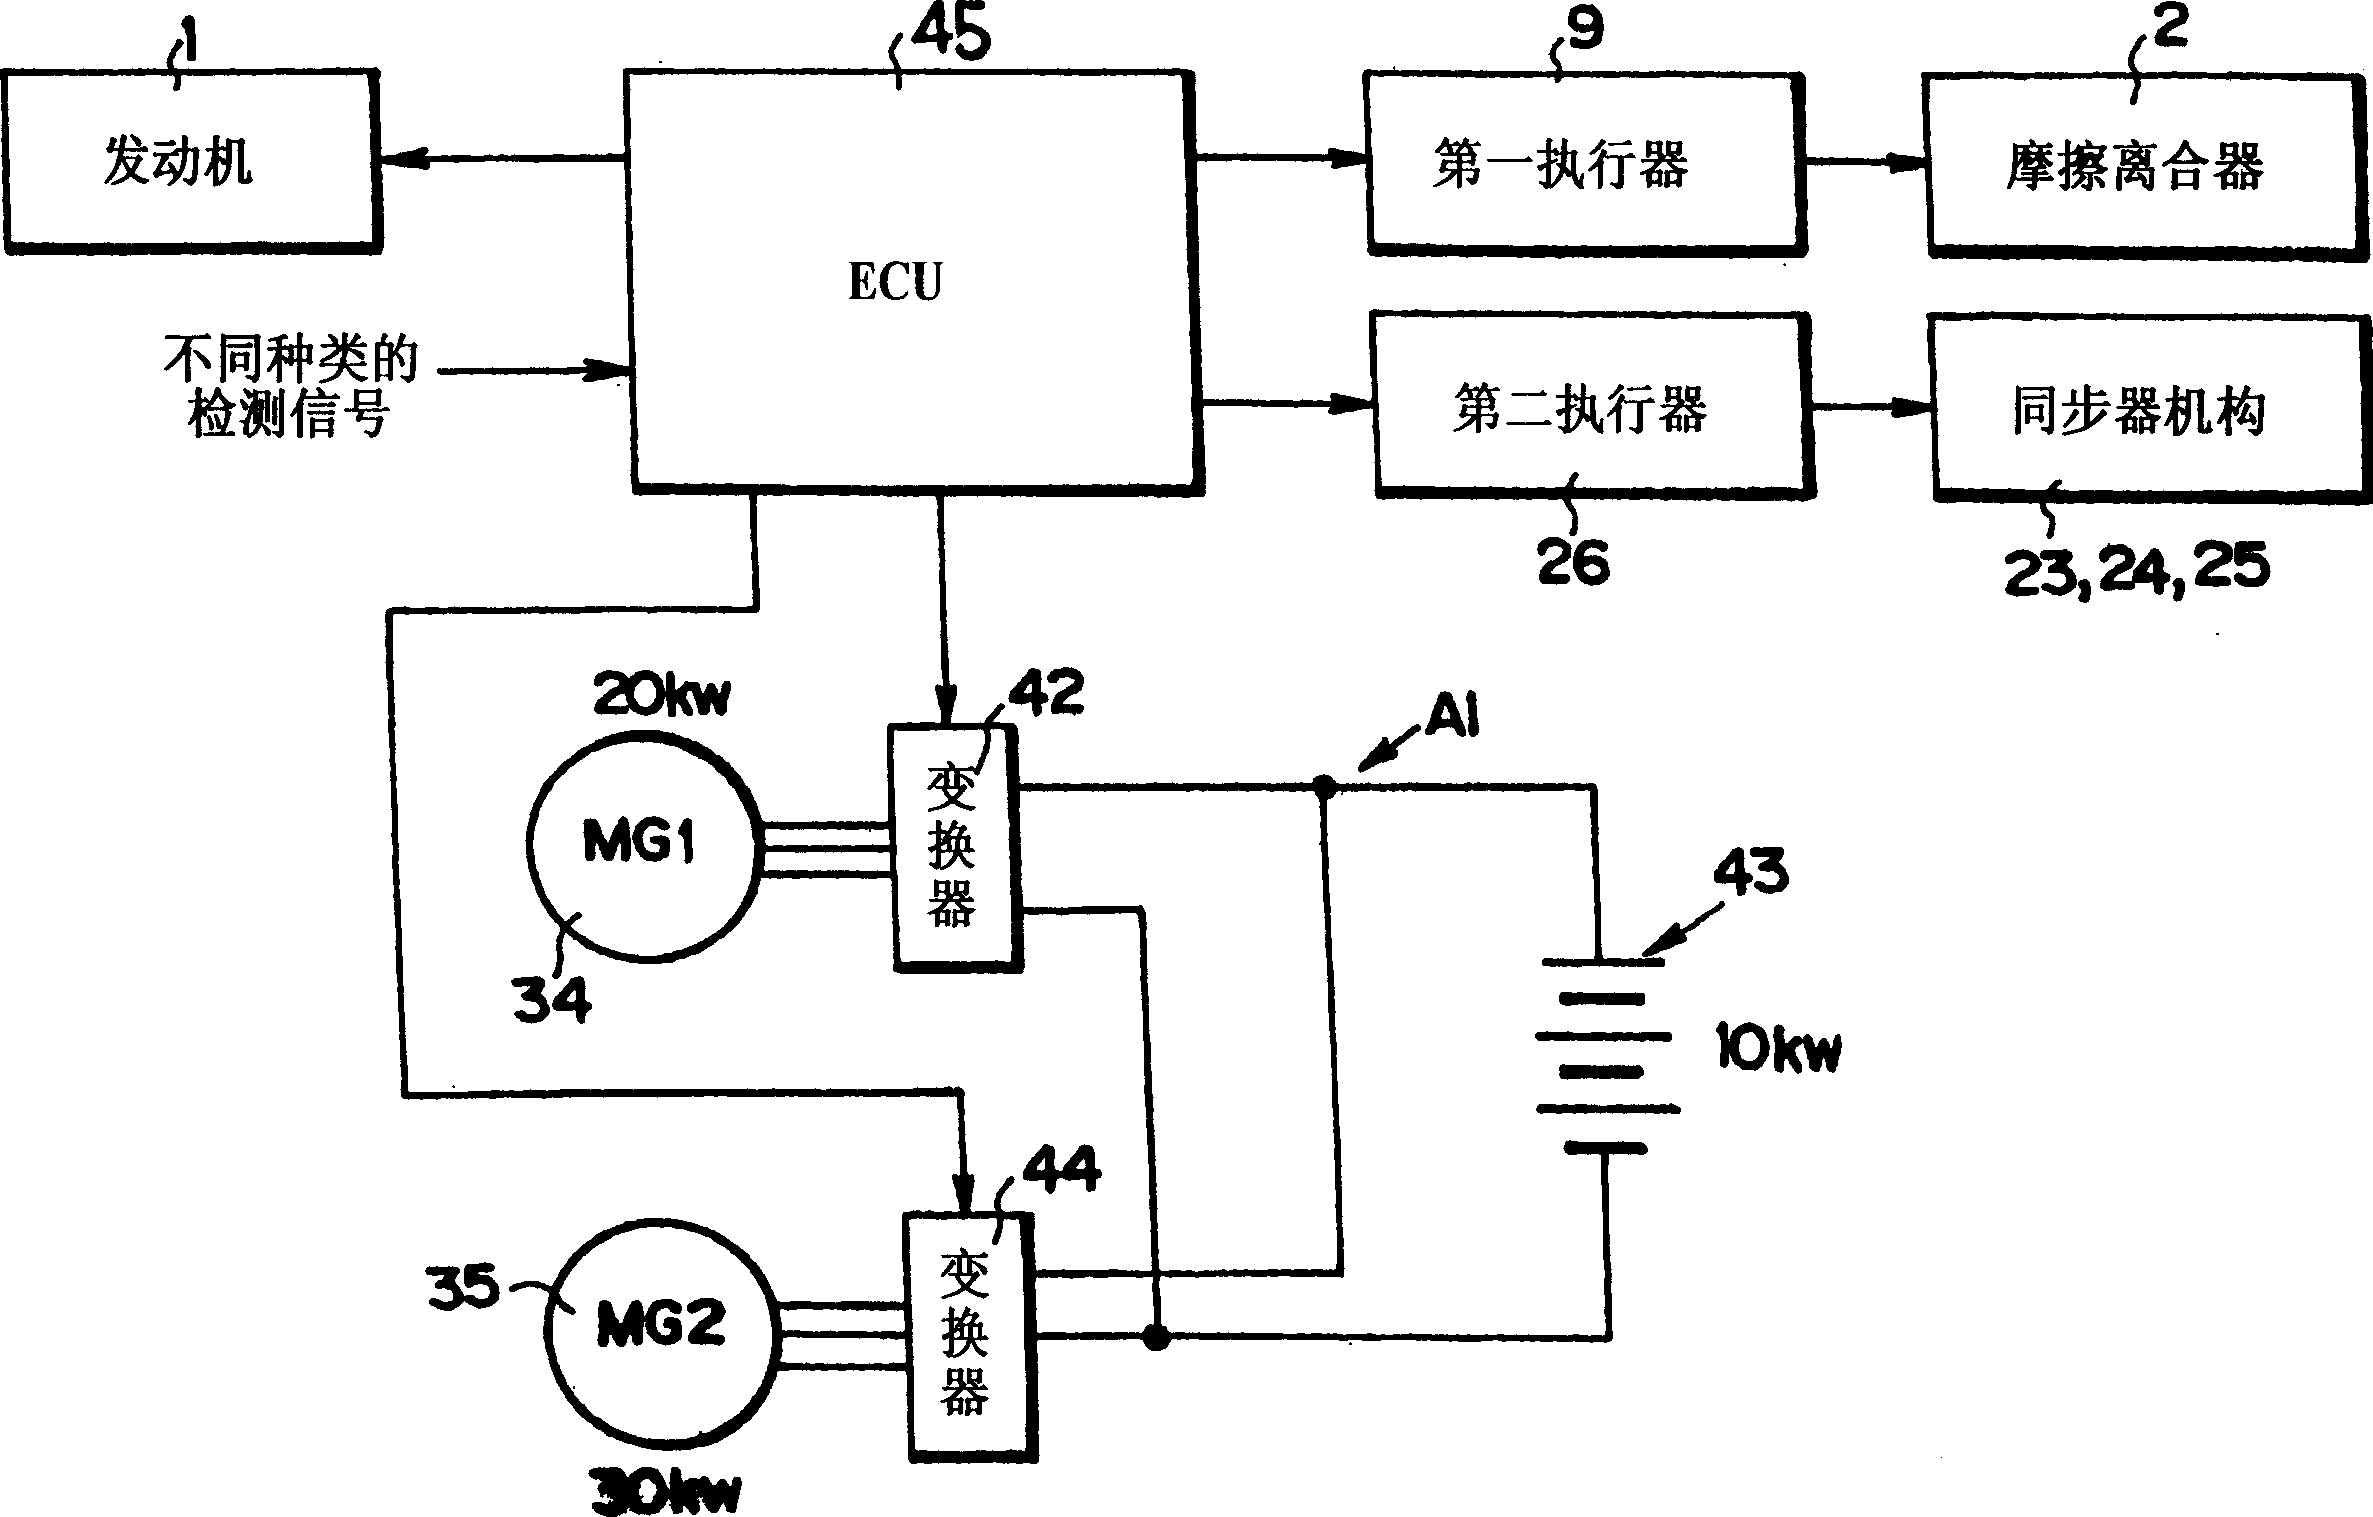 Shift gear controlling system of hybrid power vehicle